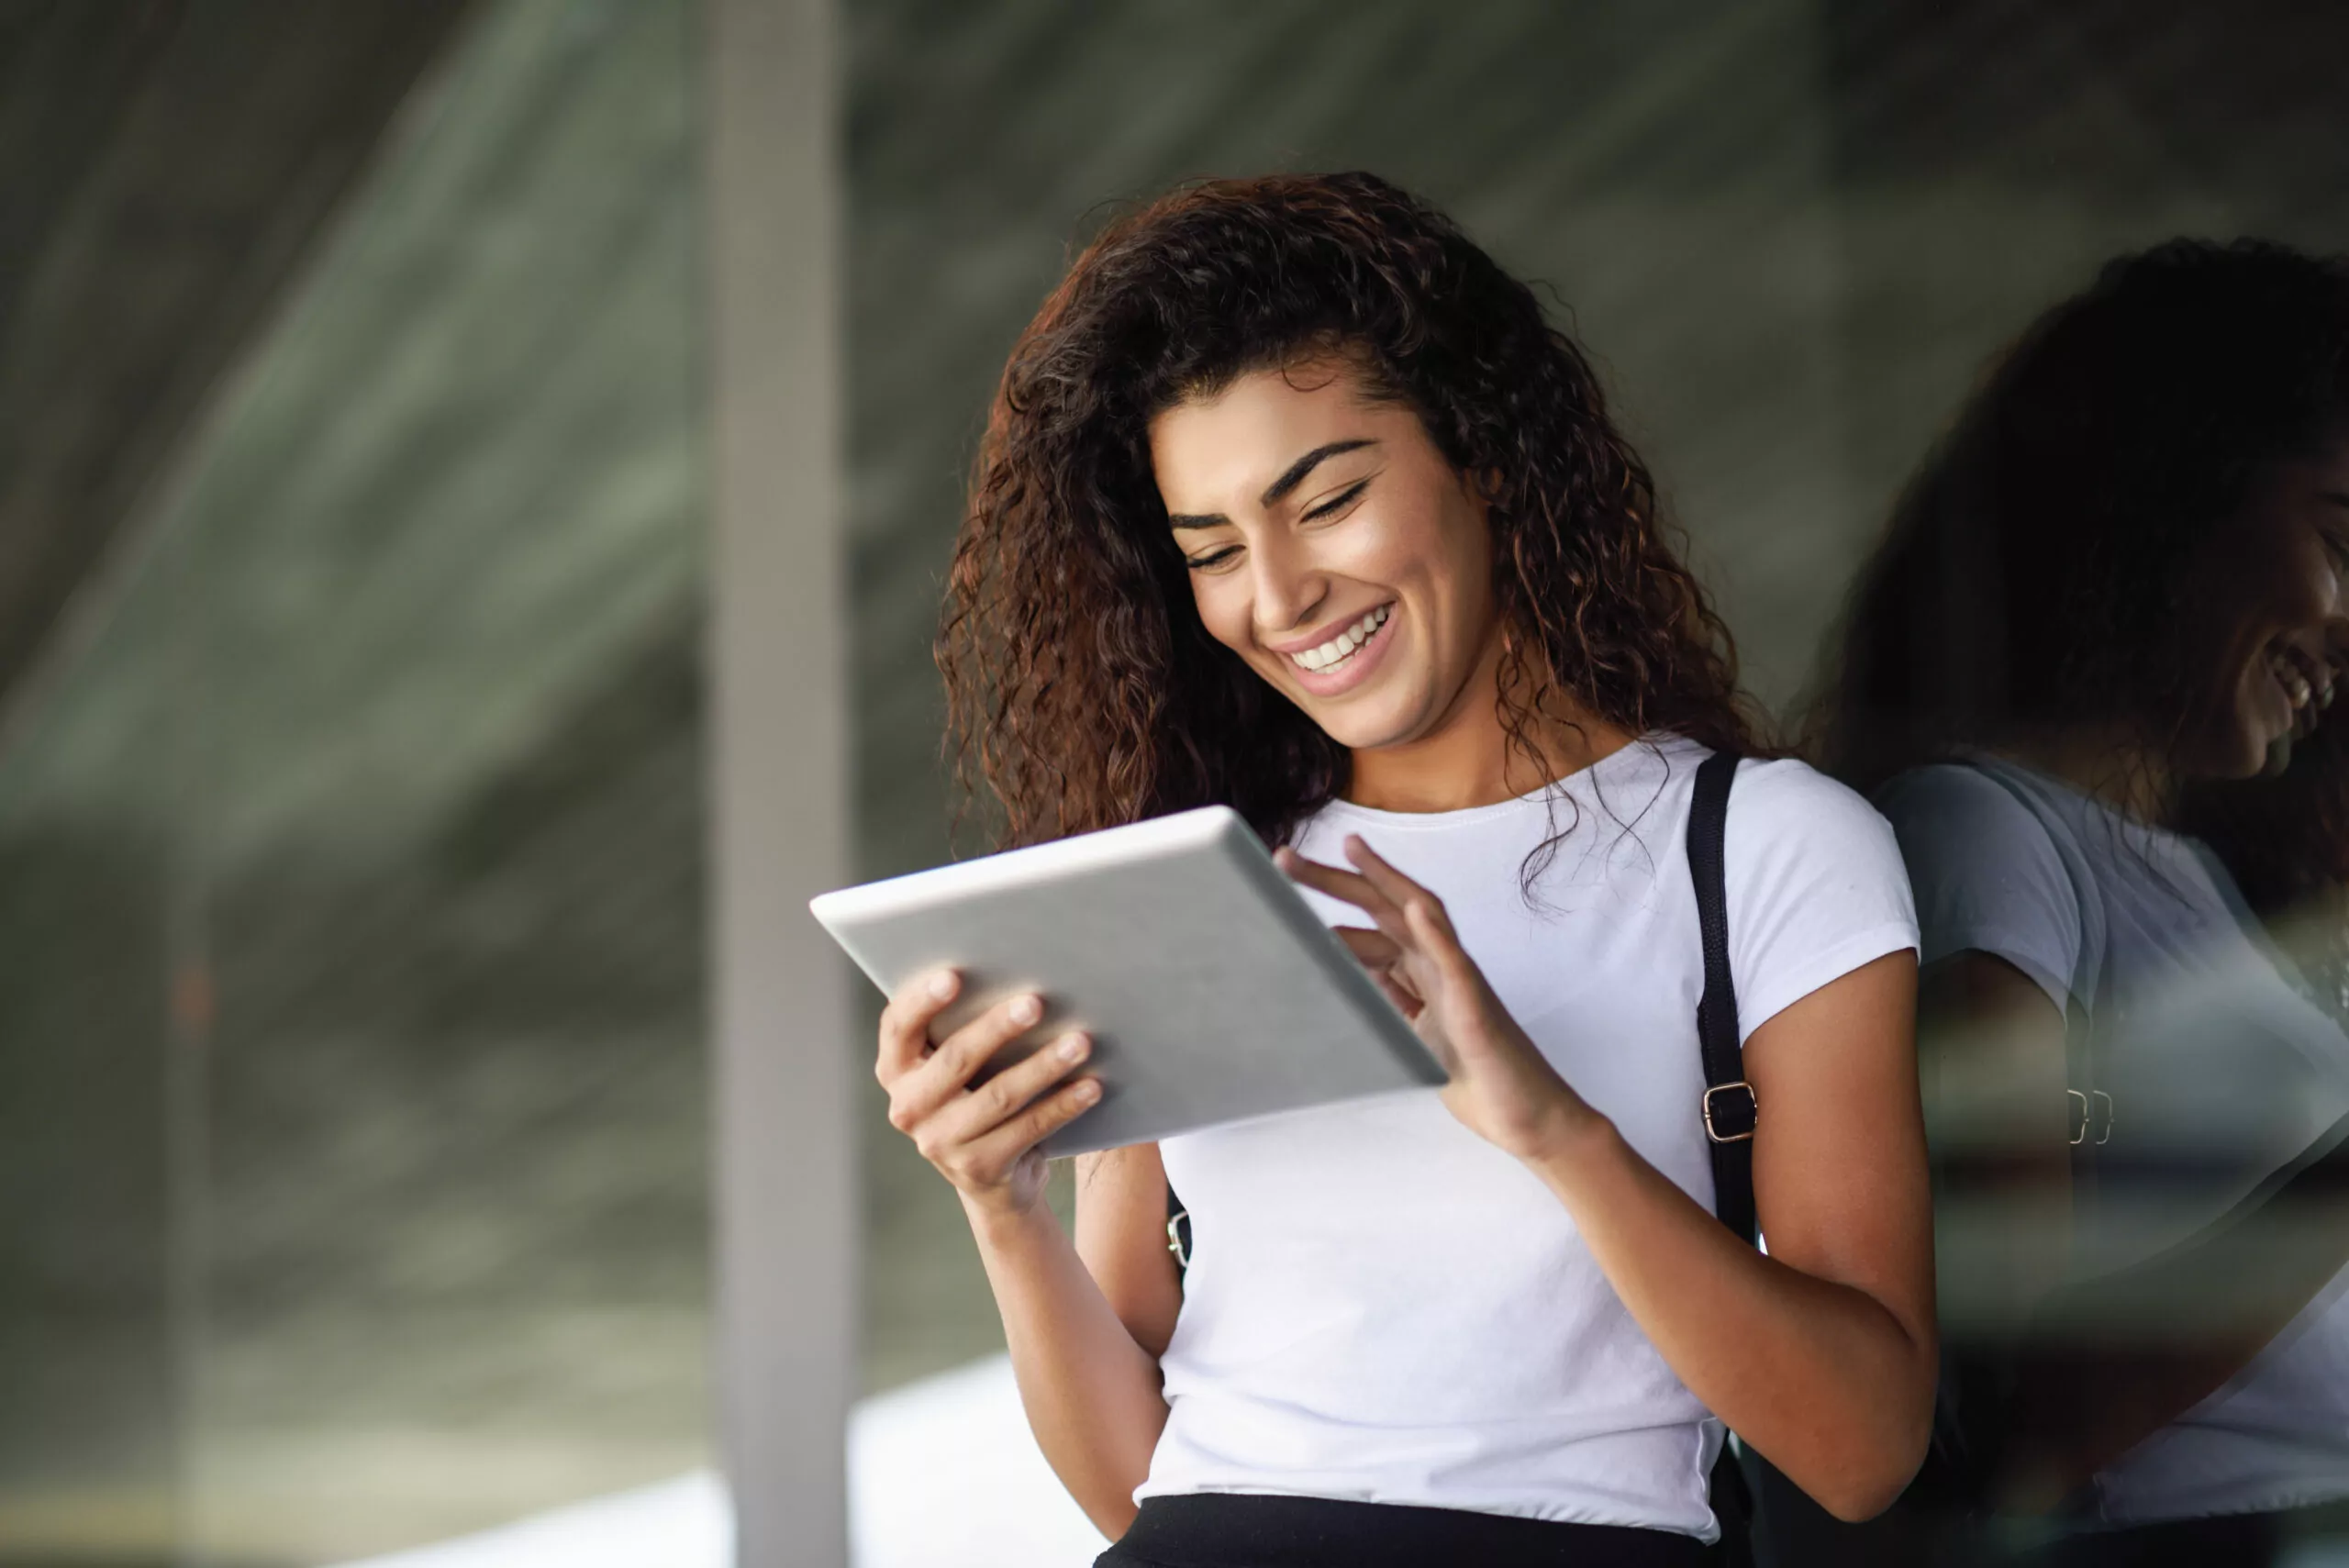 smiling beautiful woman using digital tablet outside the building